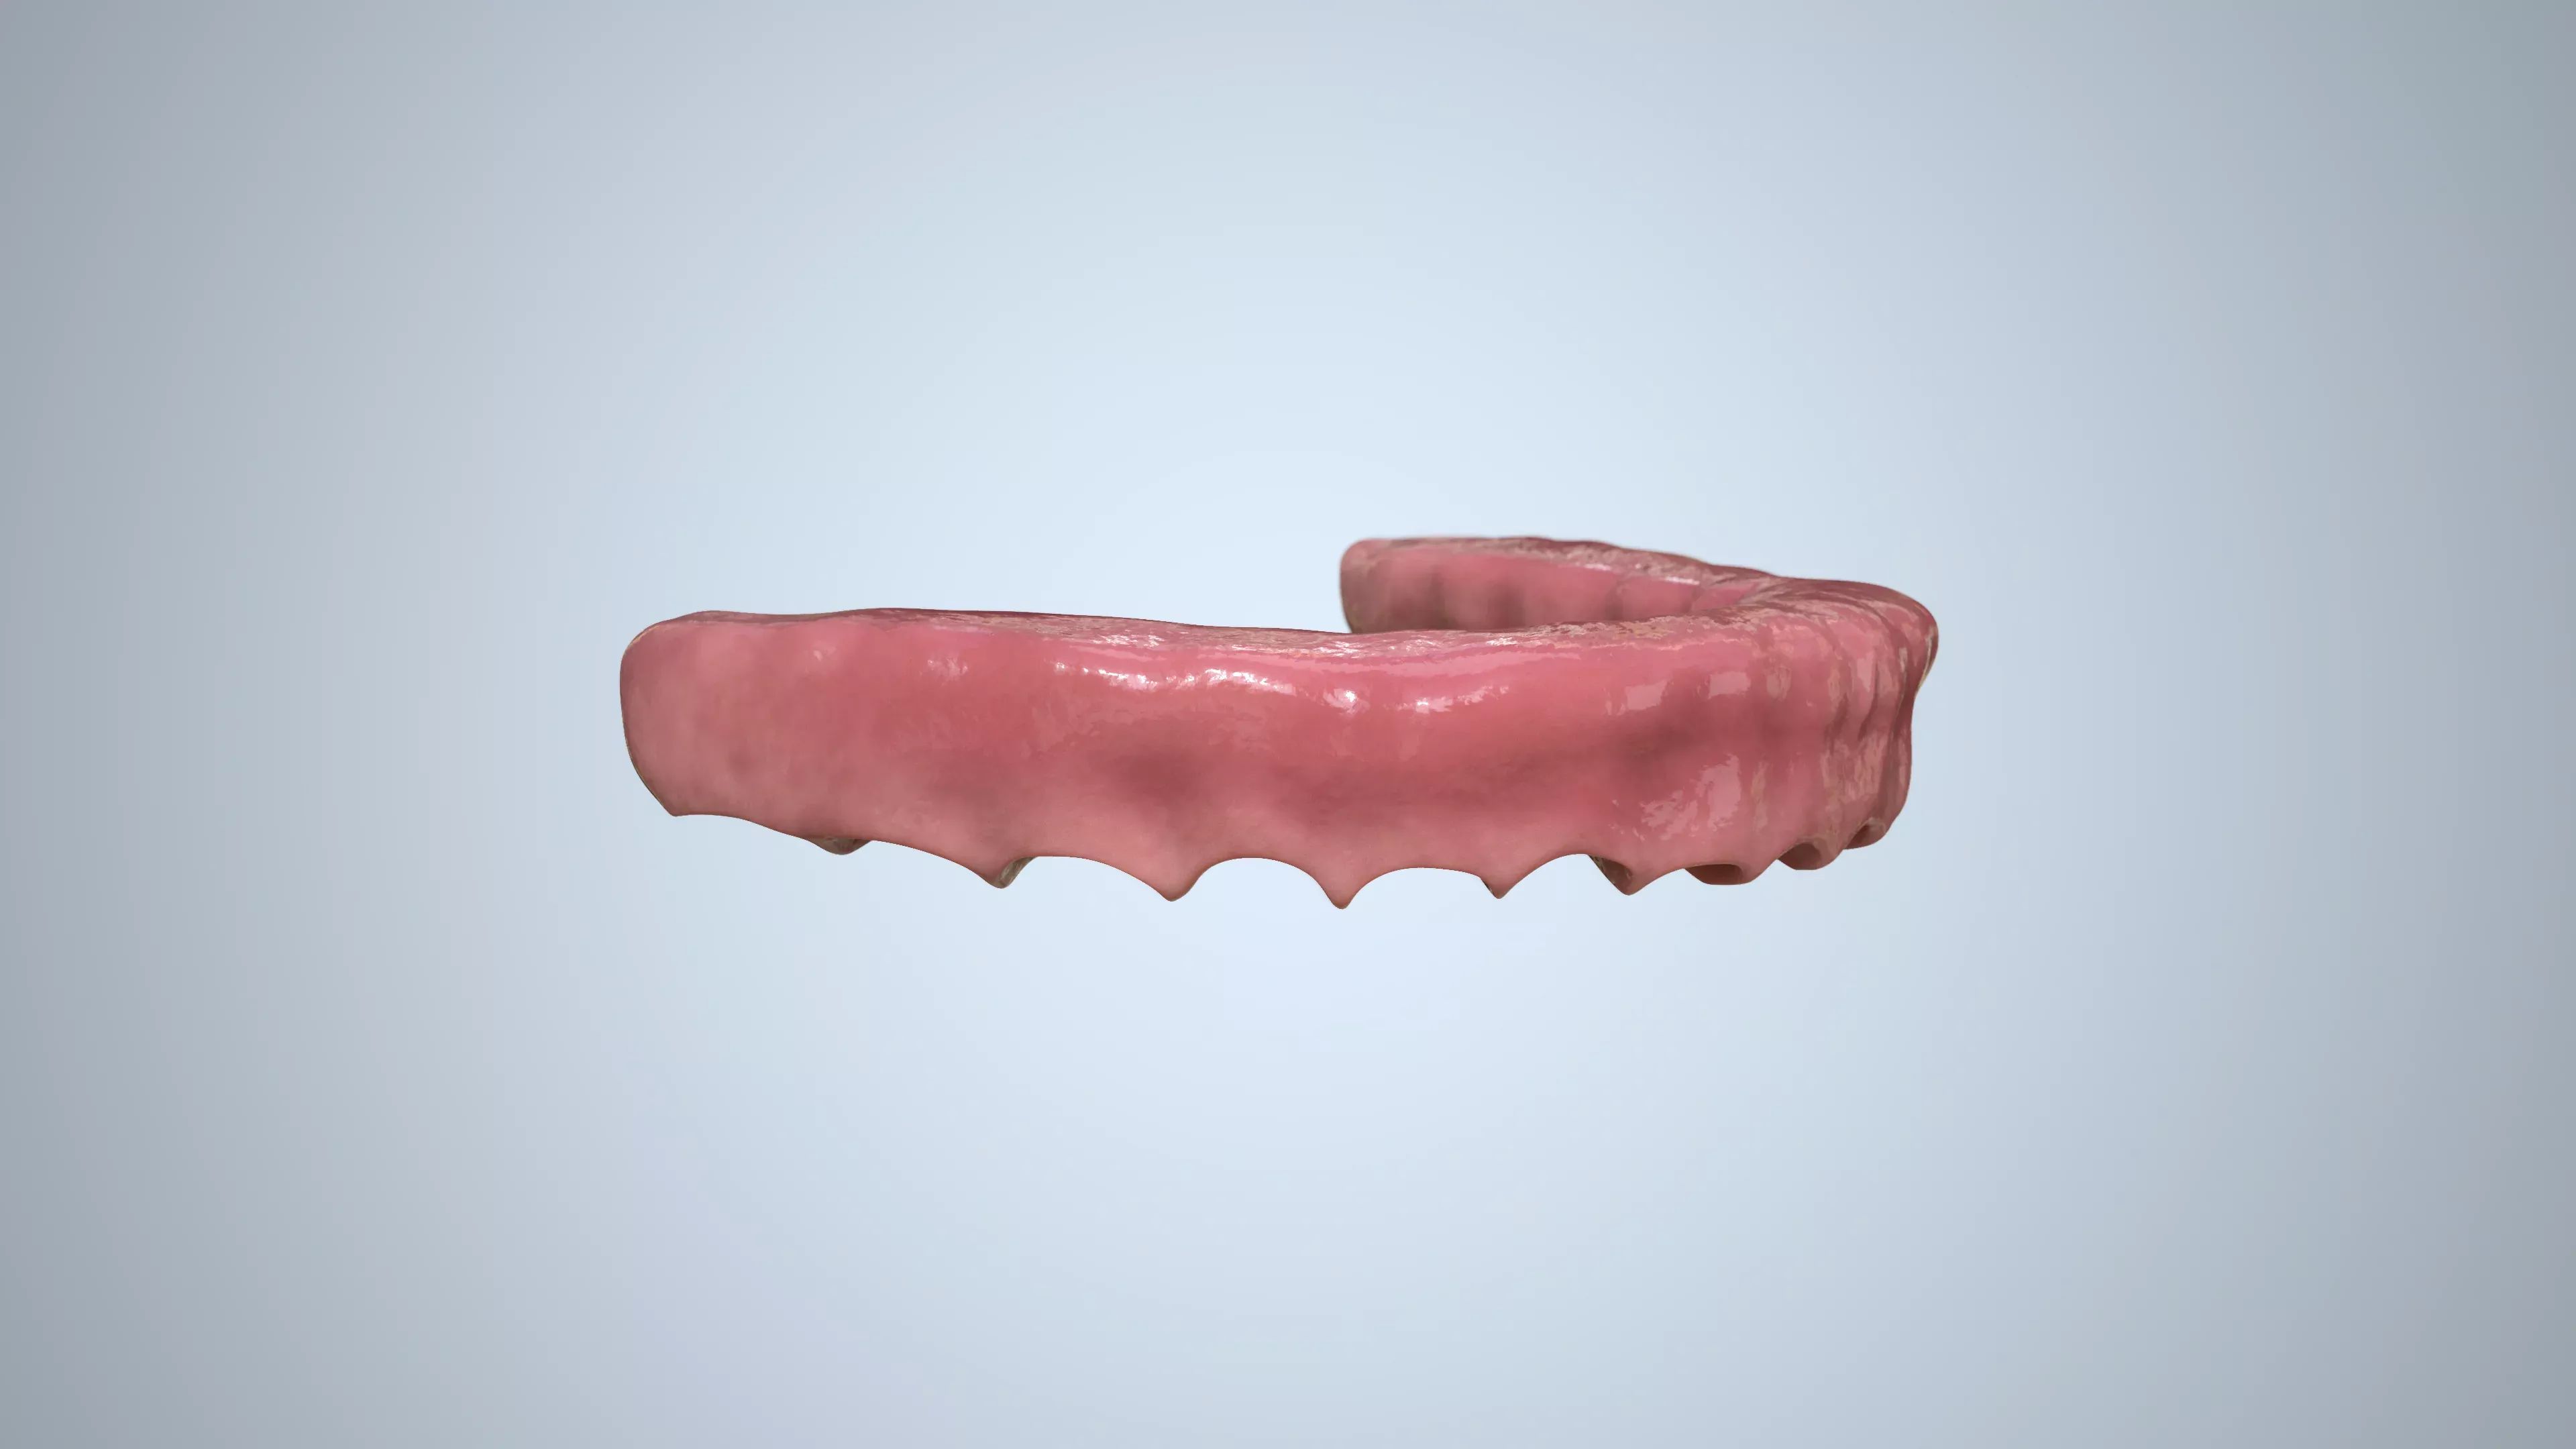 The gum for the medical 3D video after compositing.